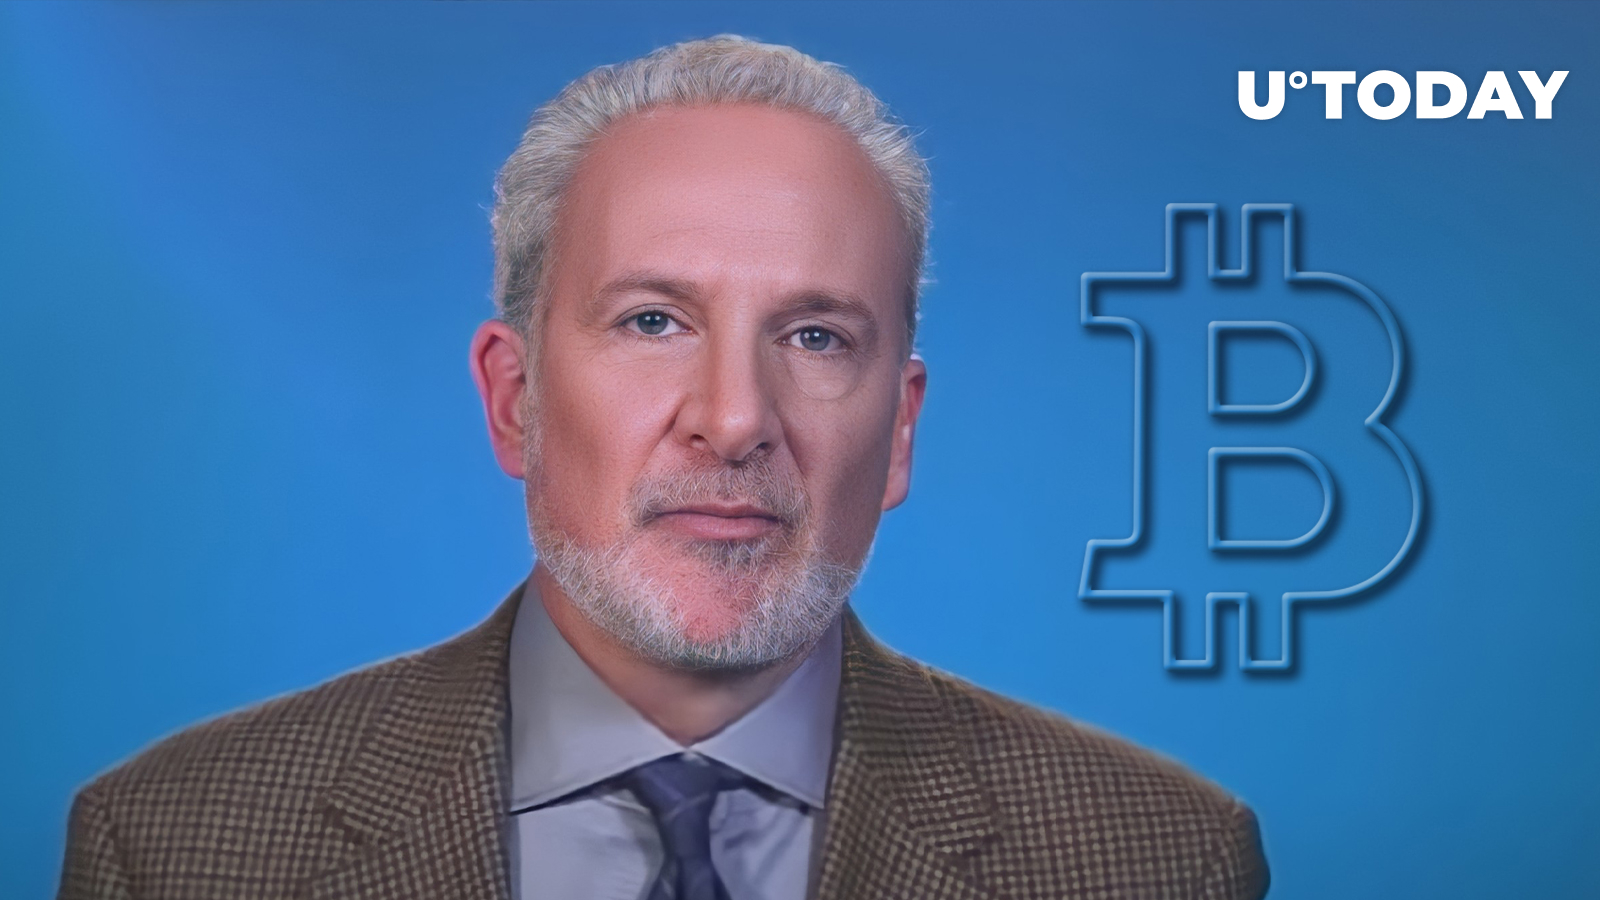 Bitcoin Is Scarce, Peter Schiff Admits, But It Does Not Matter in This Crash